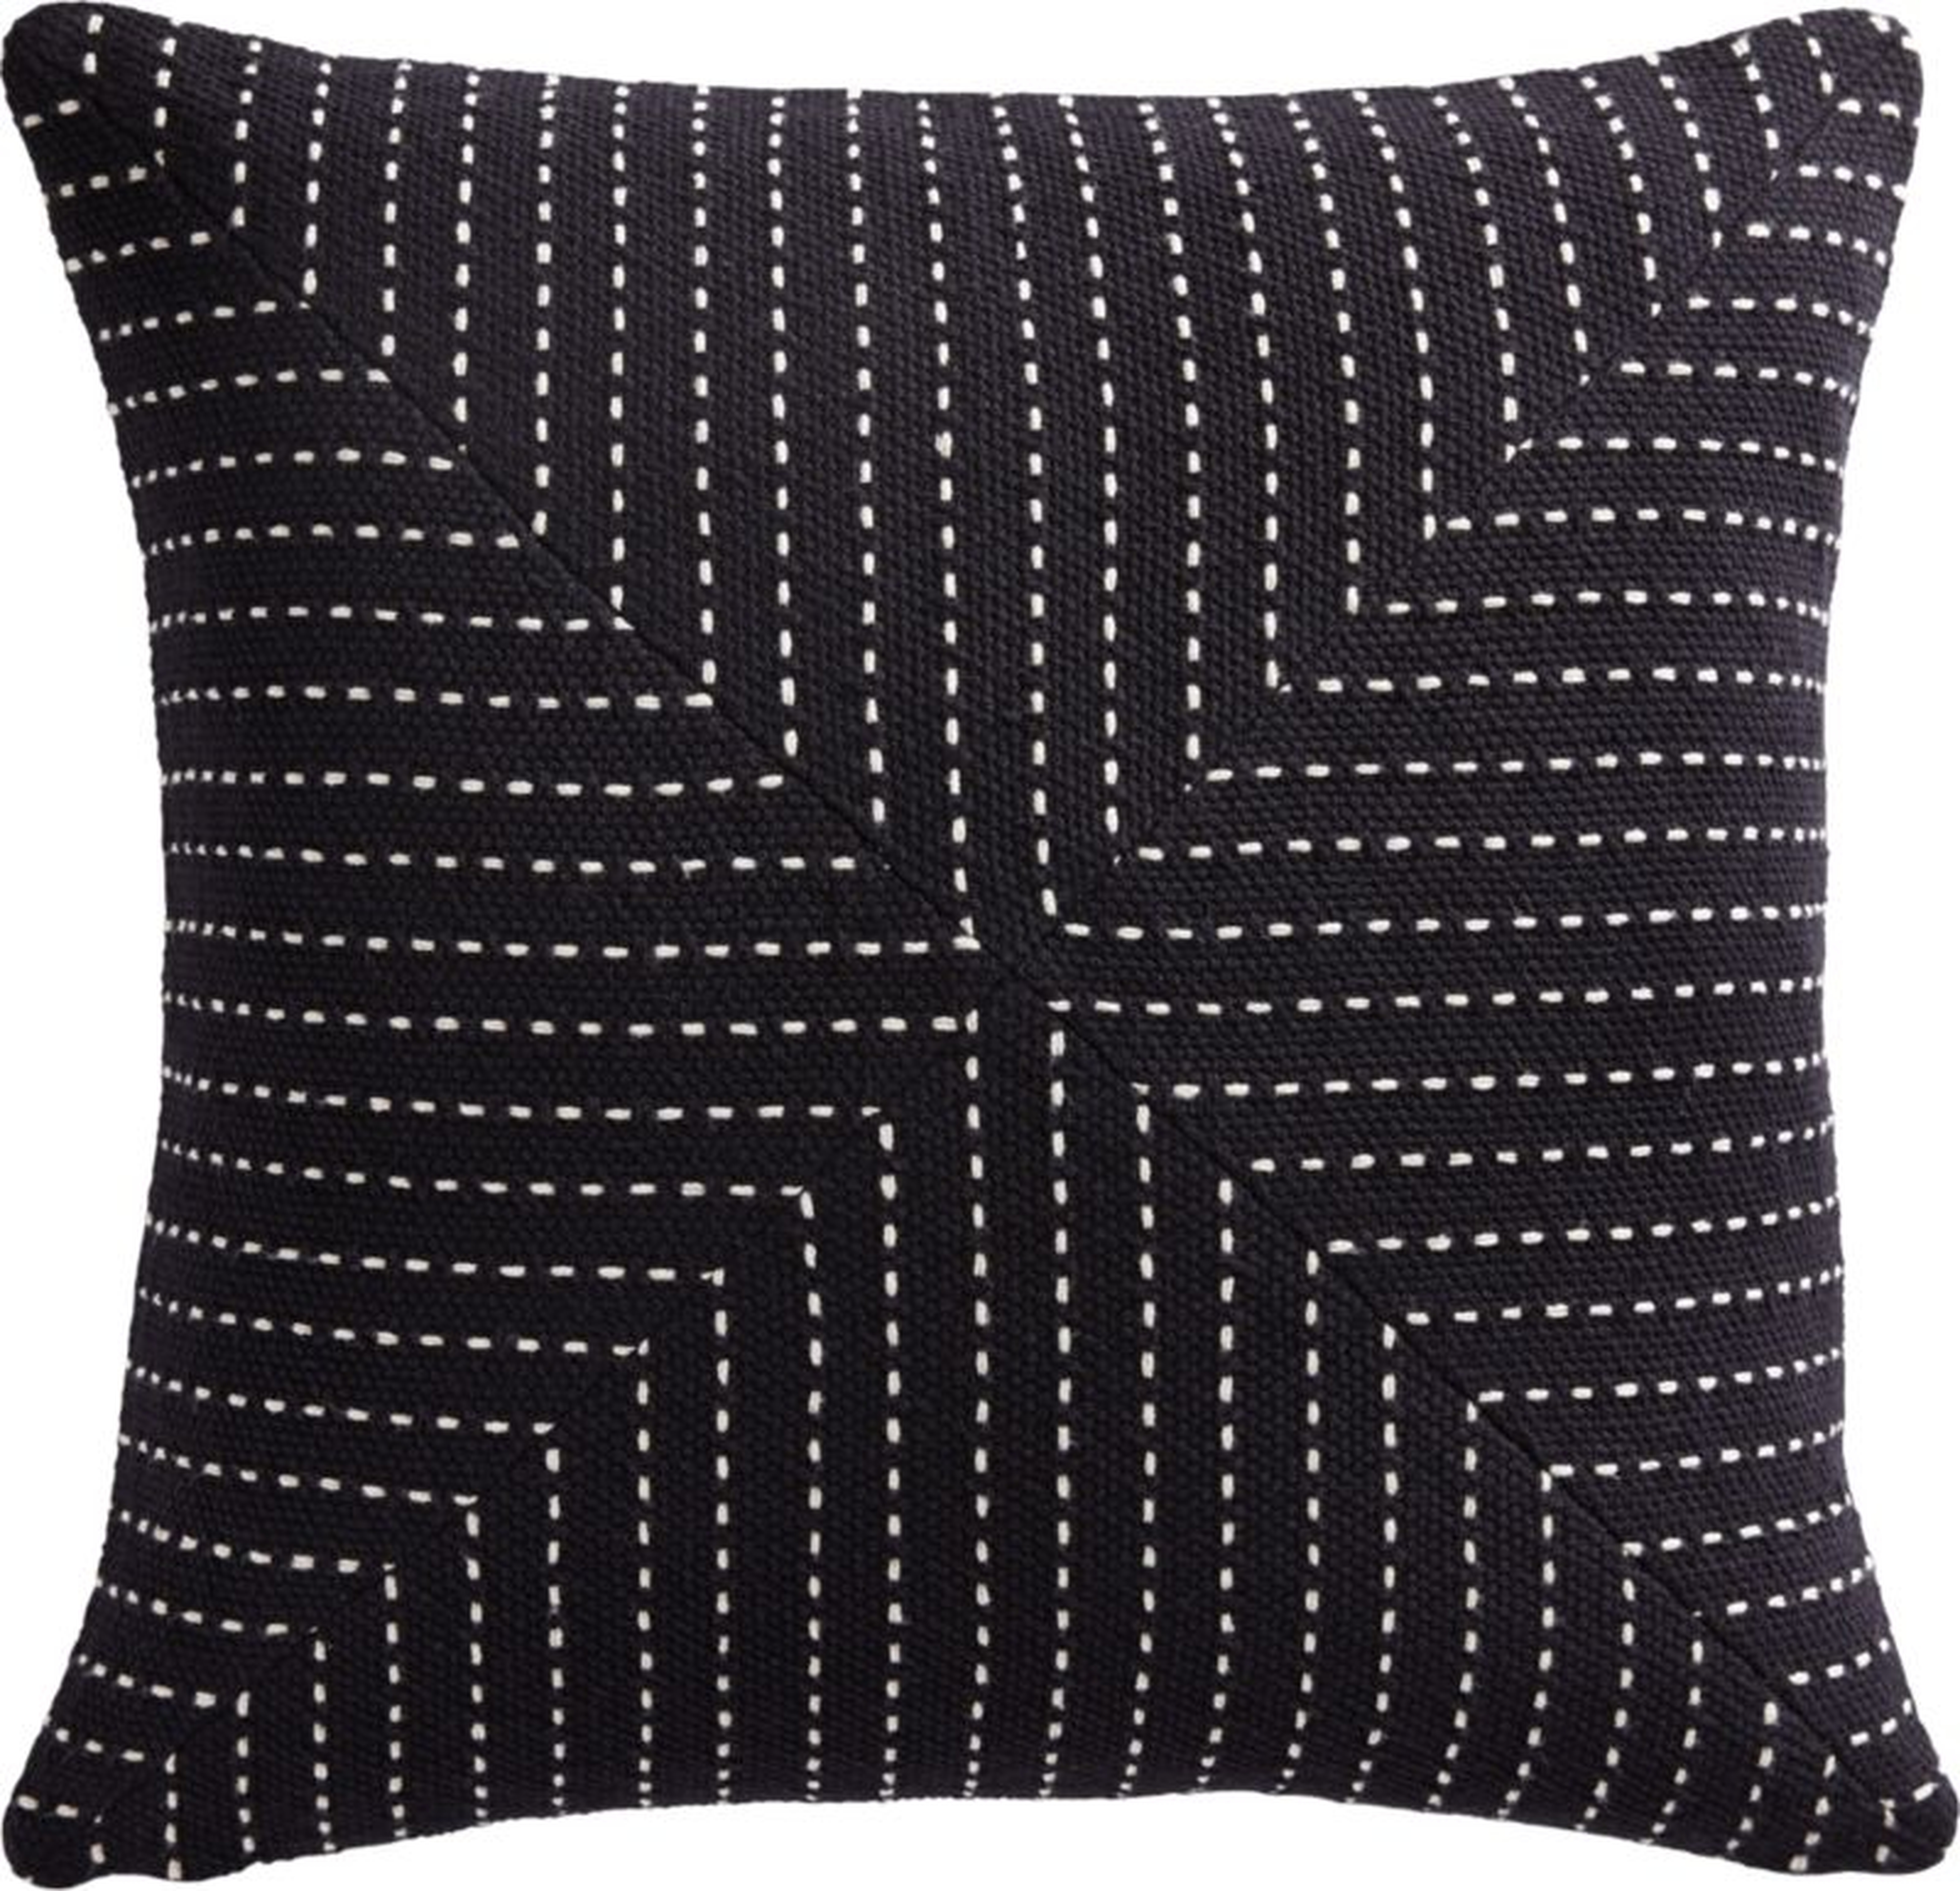 Clique Black Pillow with Feather-Down Insert, 20" x 20", - CB2